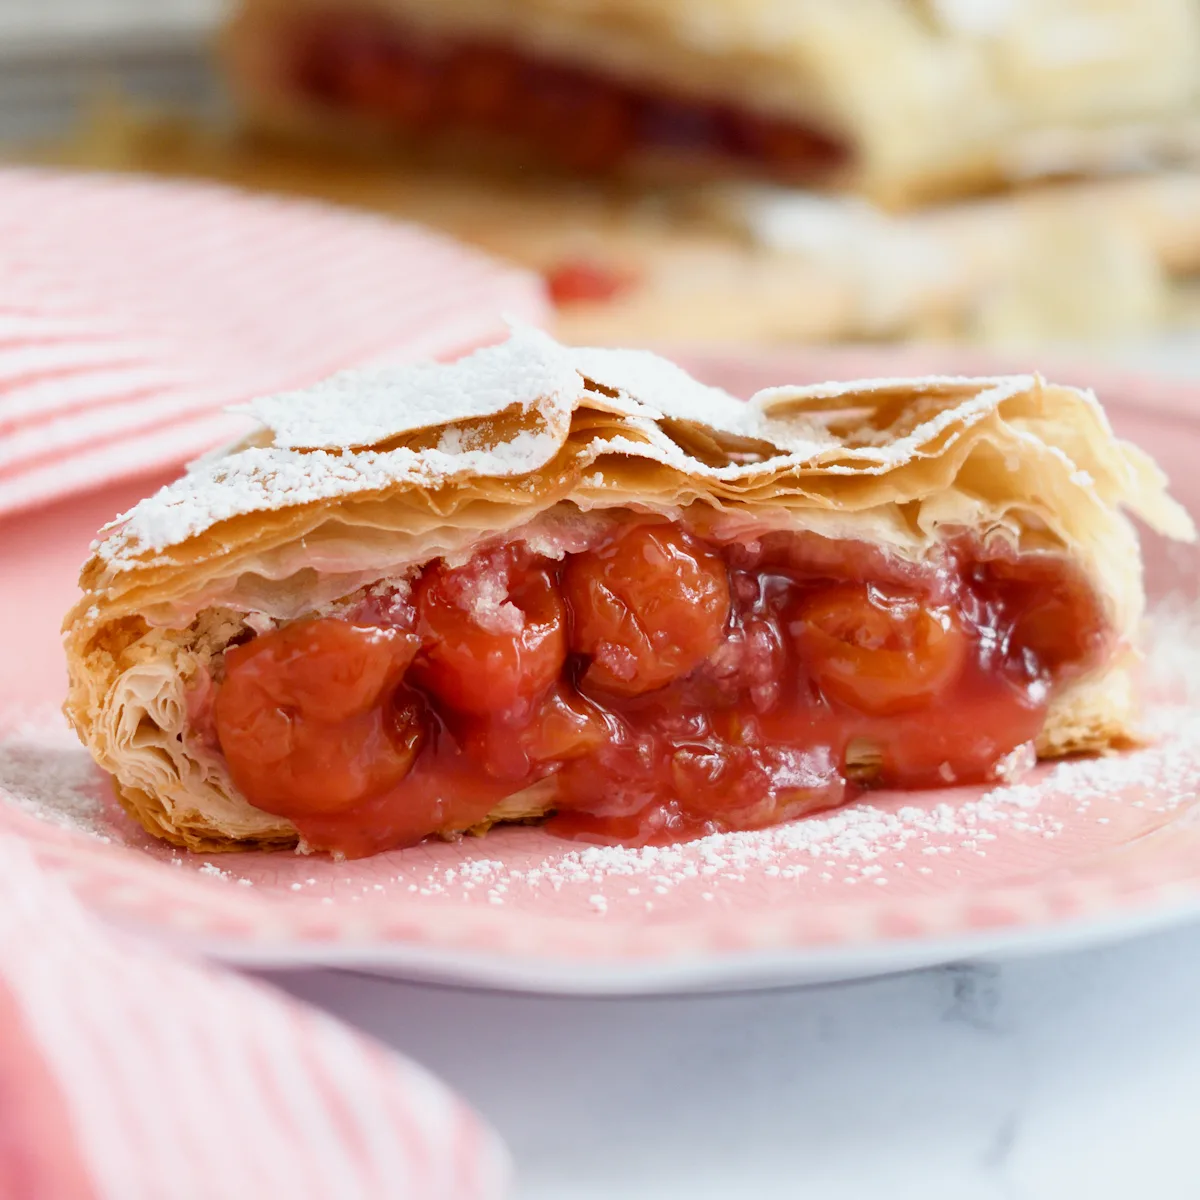 Sour Cherry Strudel made with Phyllo Dough